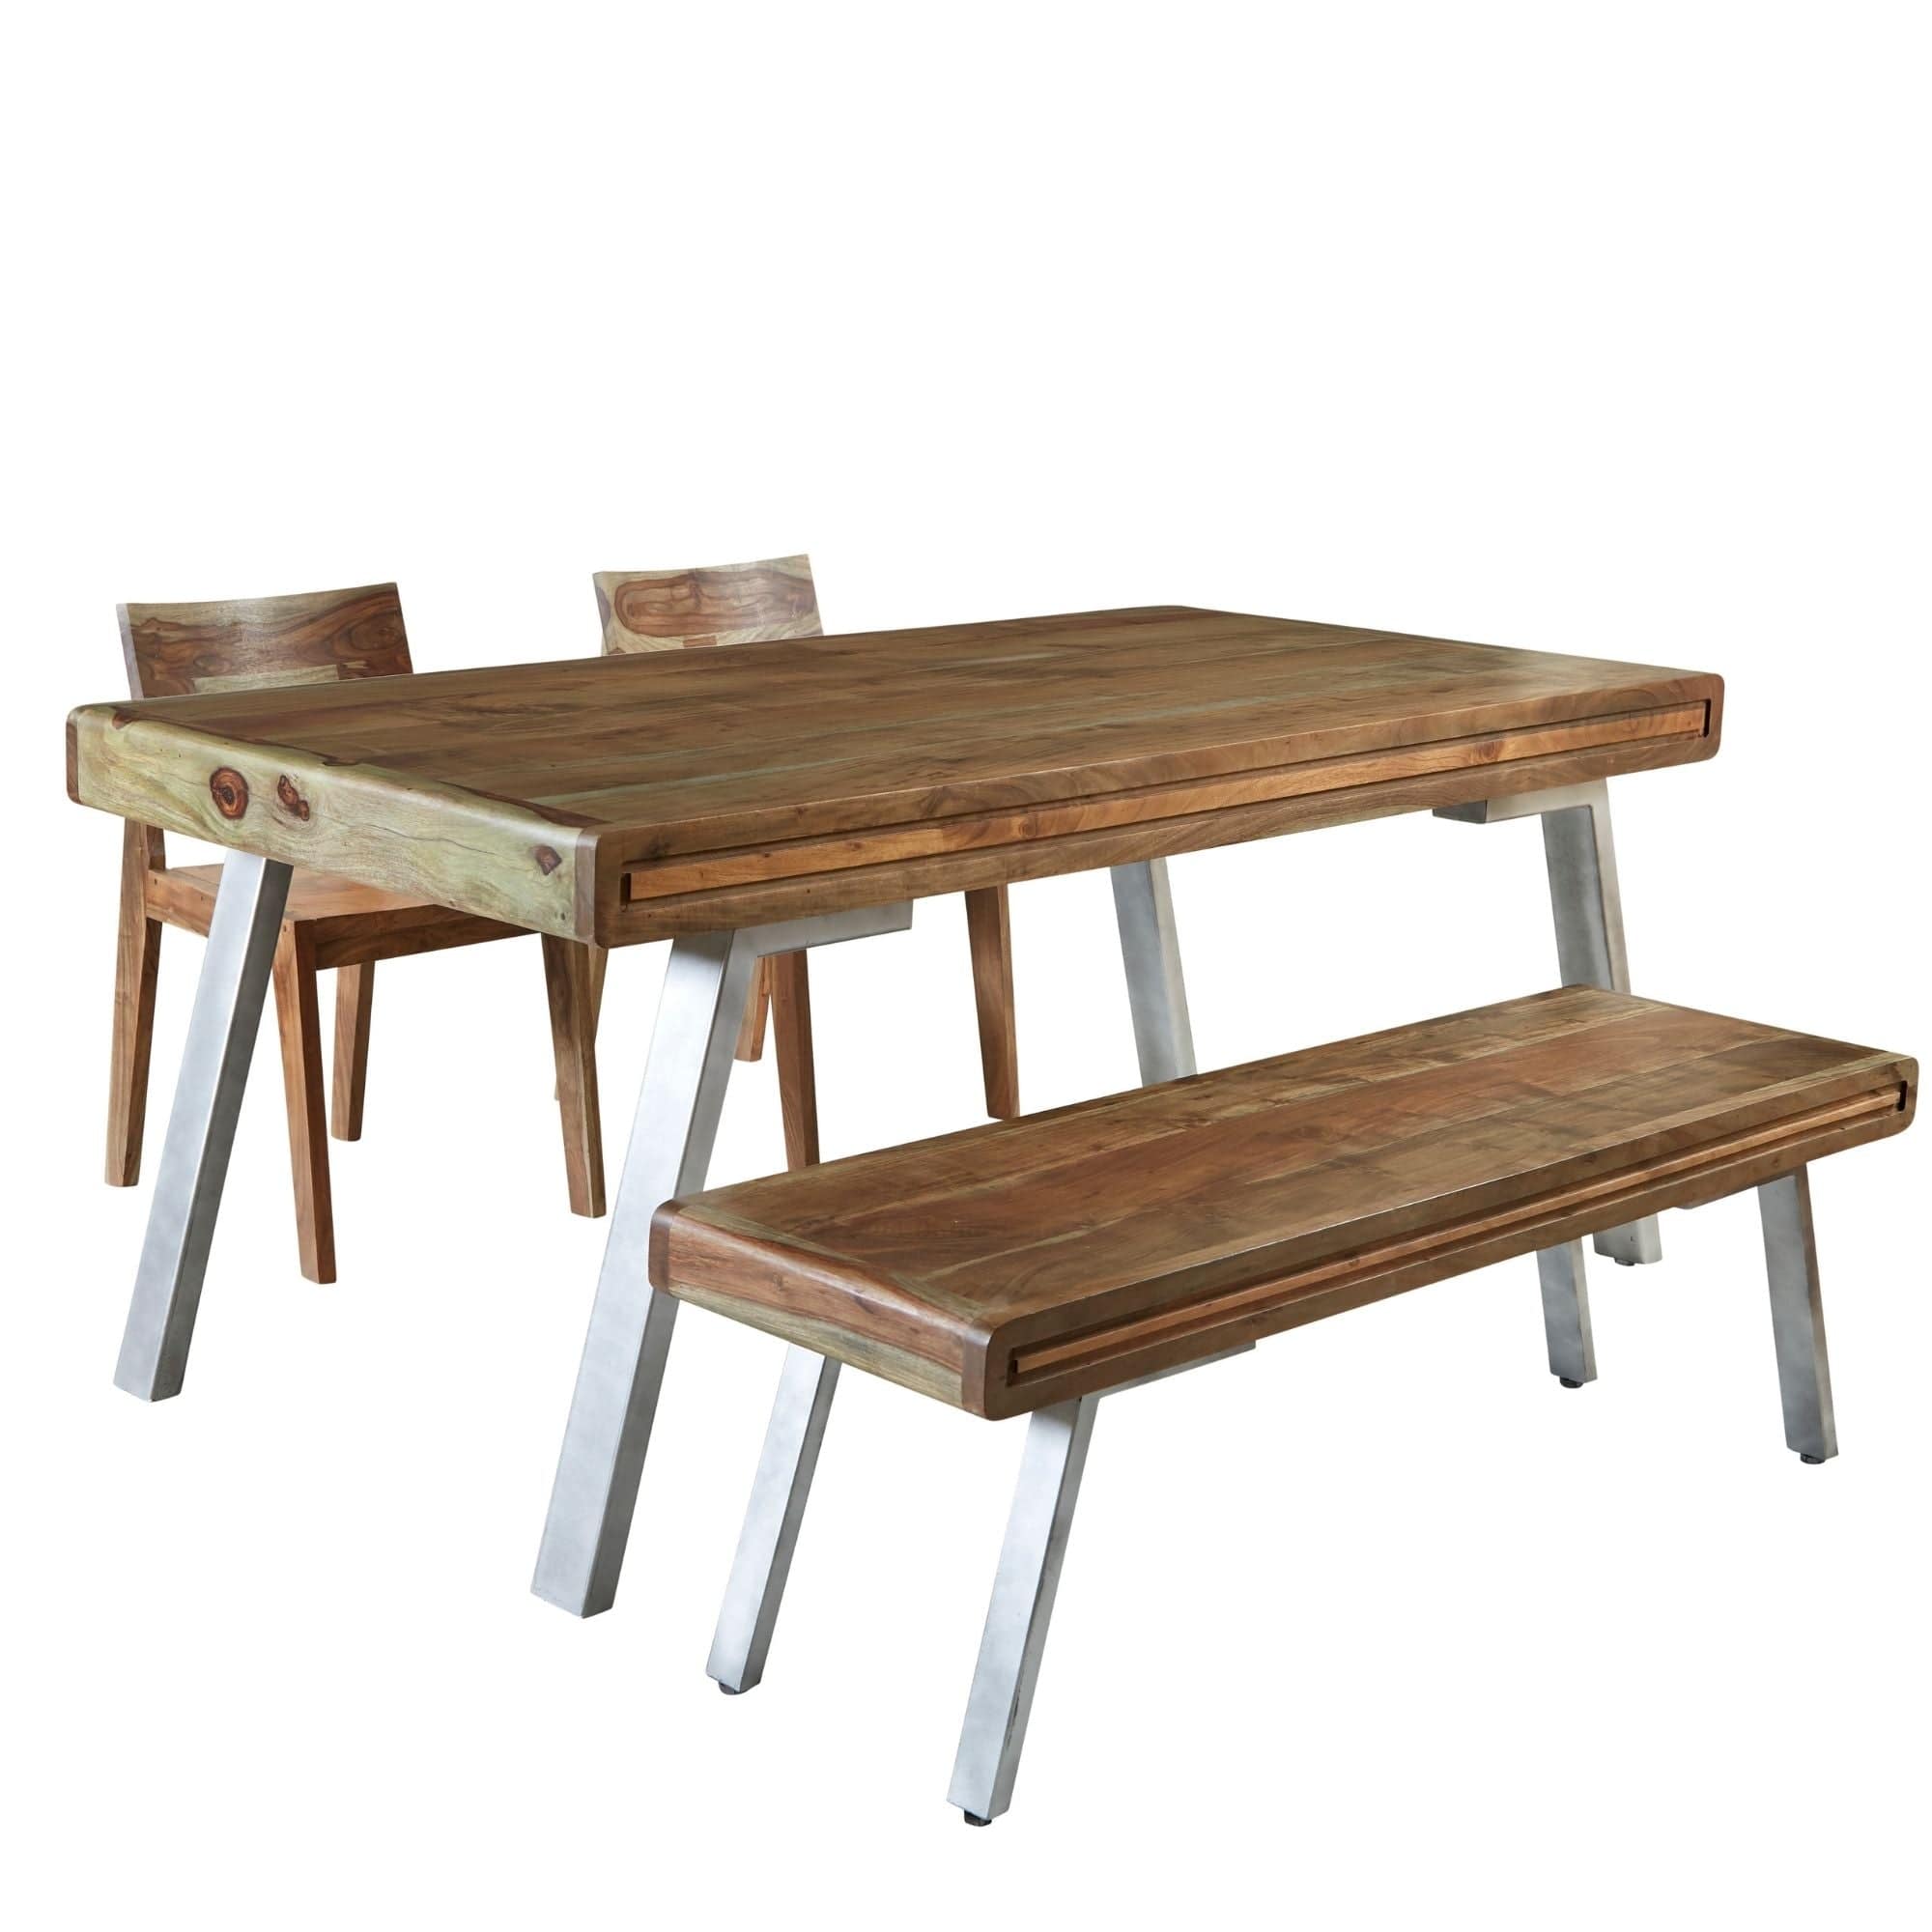 Kasia Solid Natural Acacia Wood and Reclaimed Metal Large Dining Table | MalletandPlane.com  